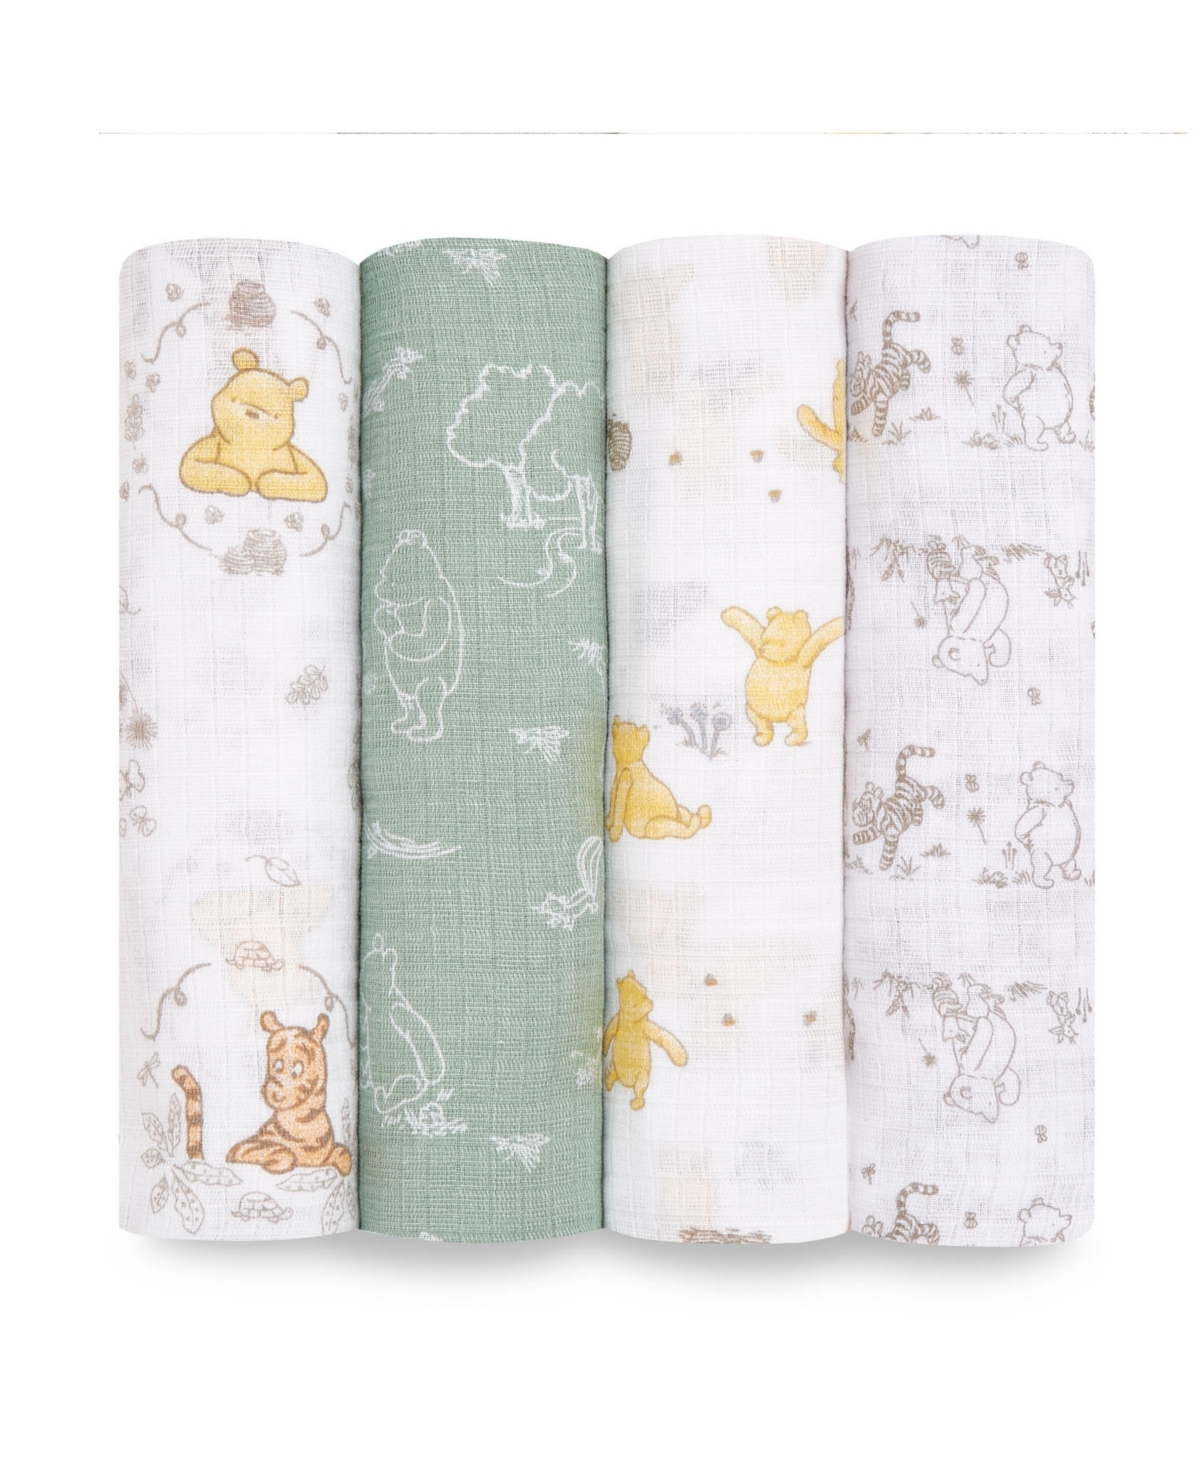 Aden By Aden + Anais Baby Boys Winnie The Pooh Swaddle, Pack Of 4 In Multi